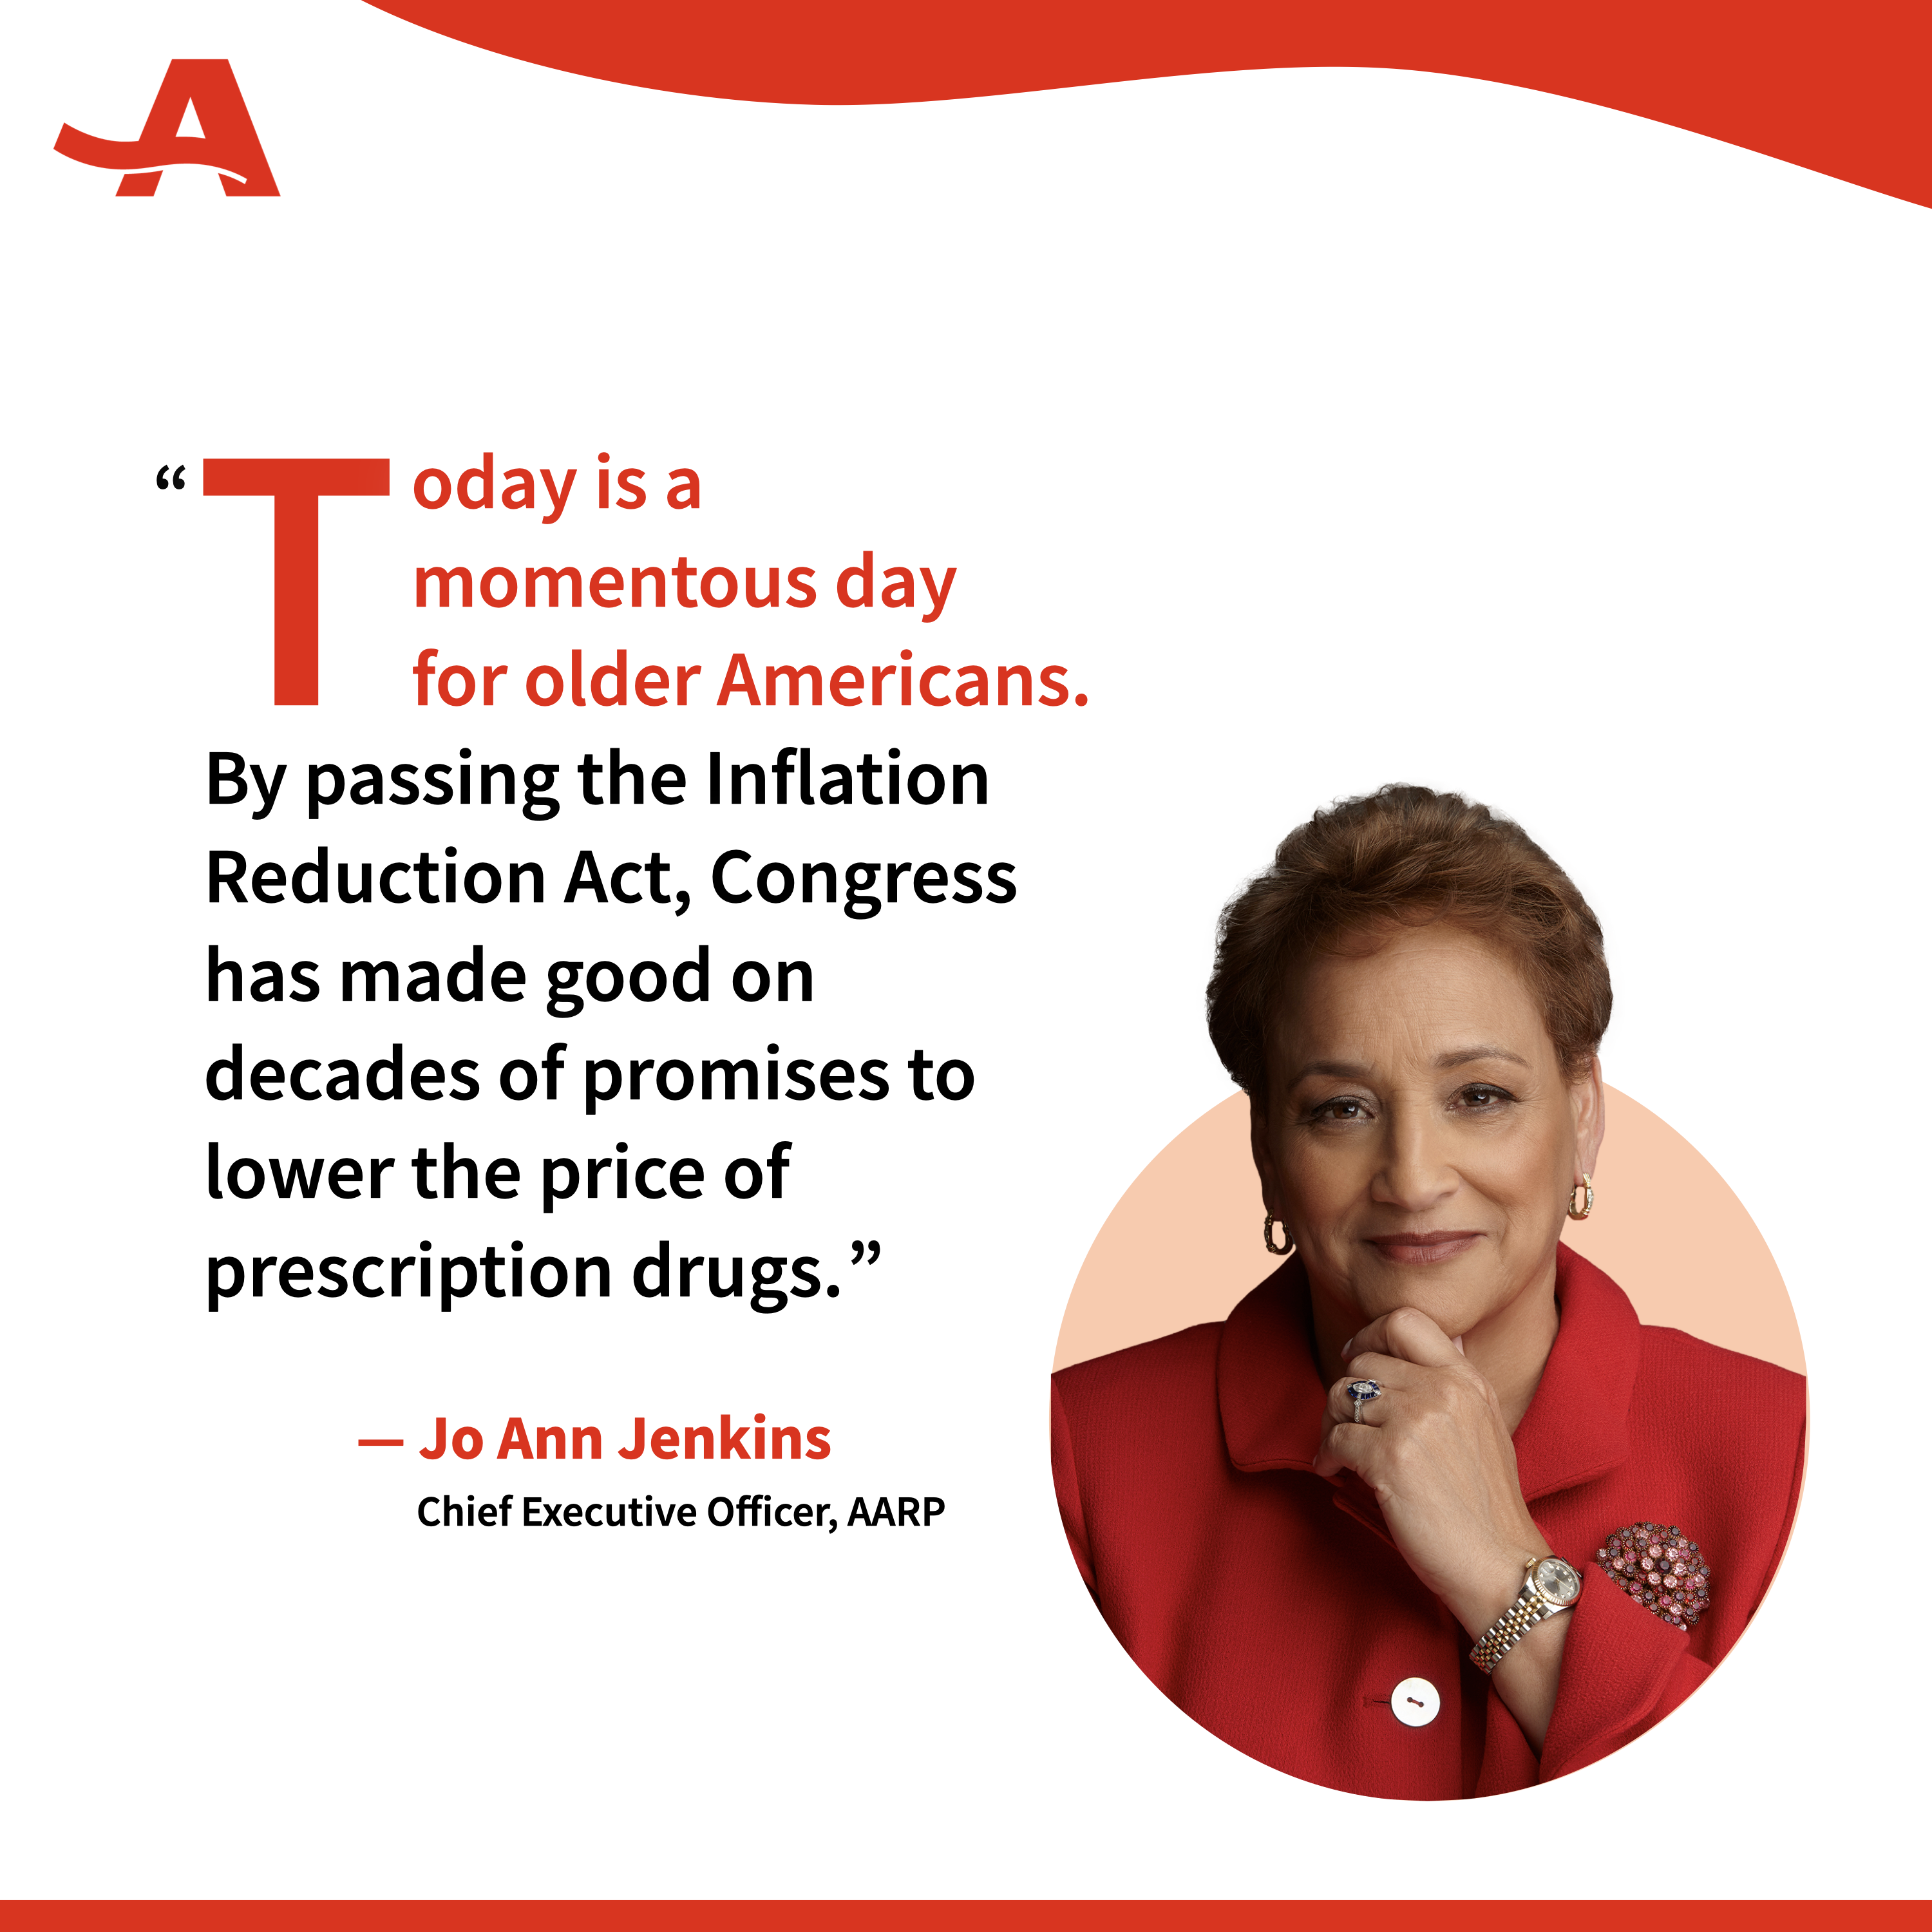 AARP CEO Inflation Reduction Act